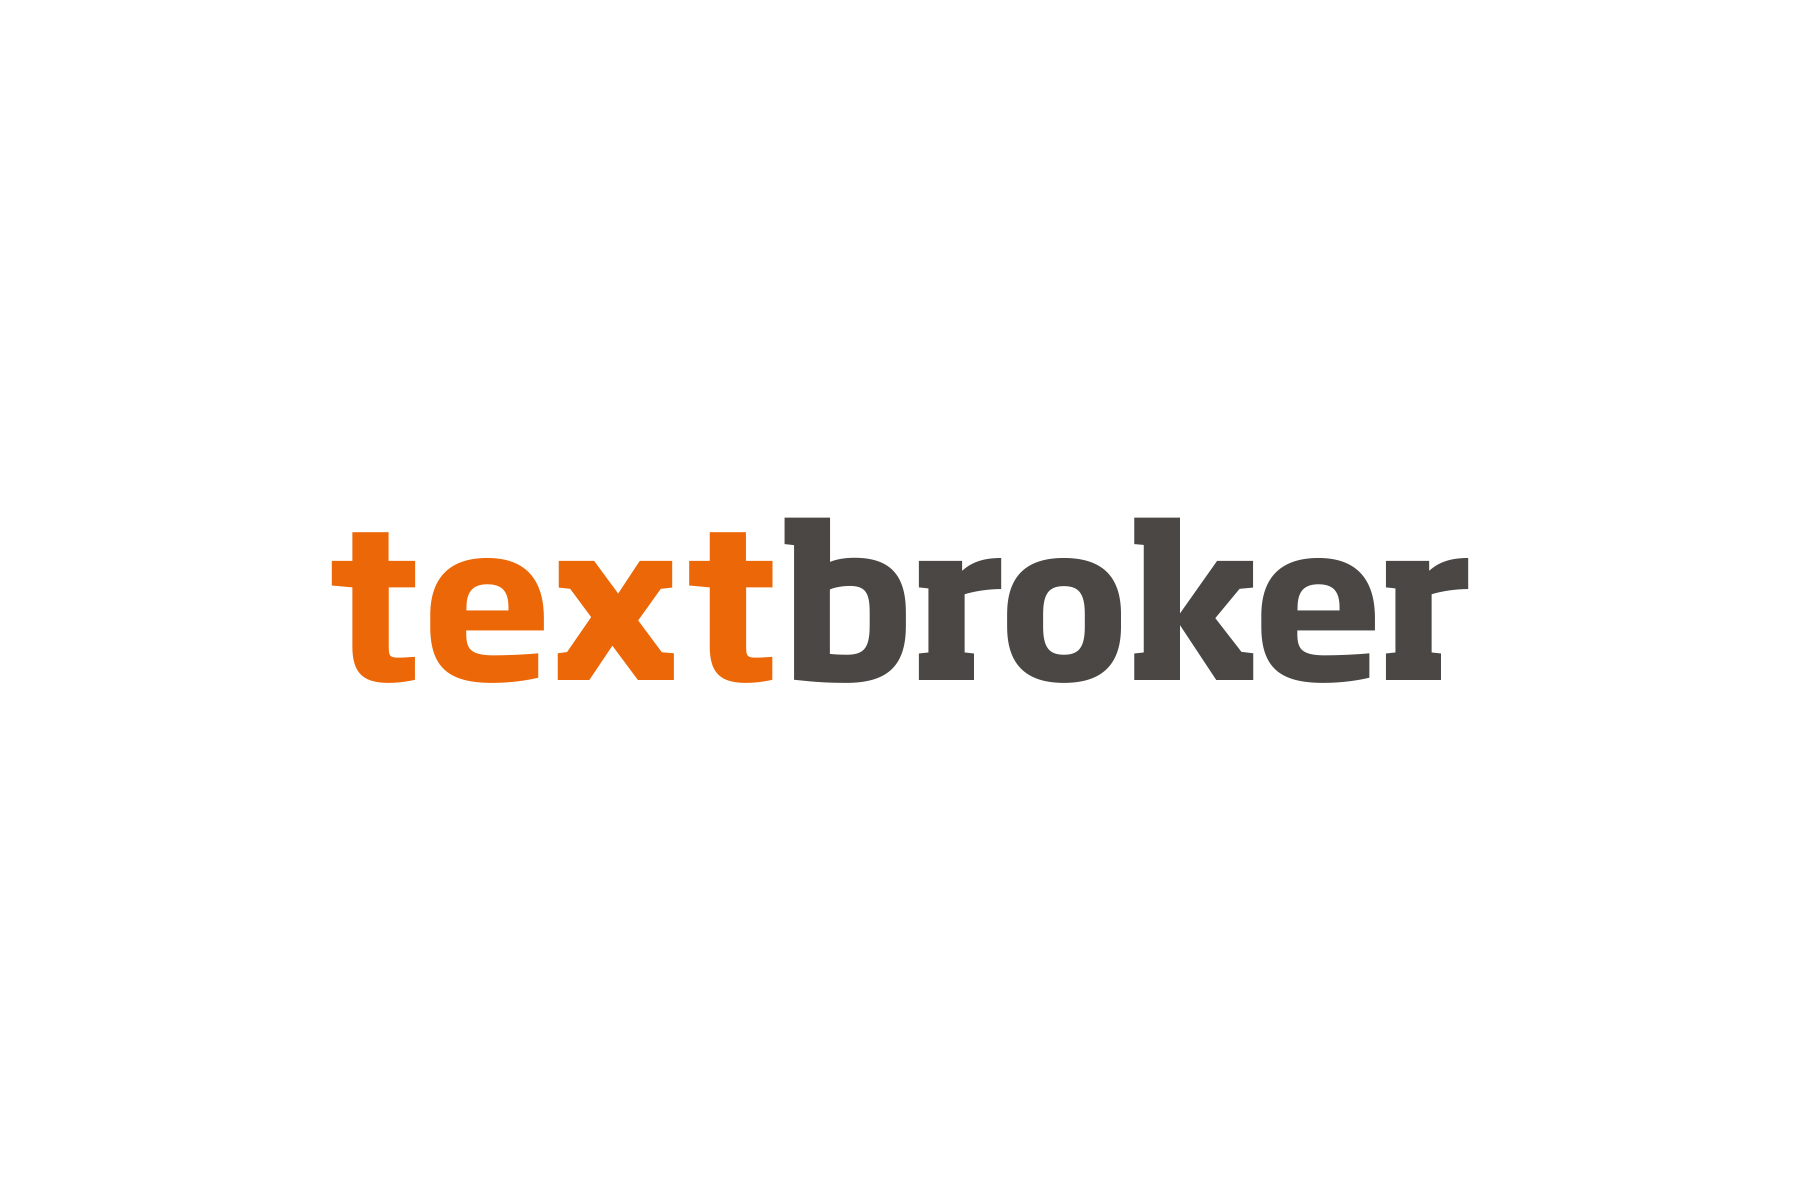 textbroker content writing service by experts